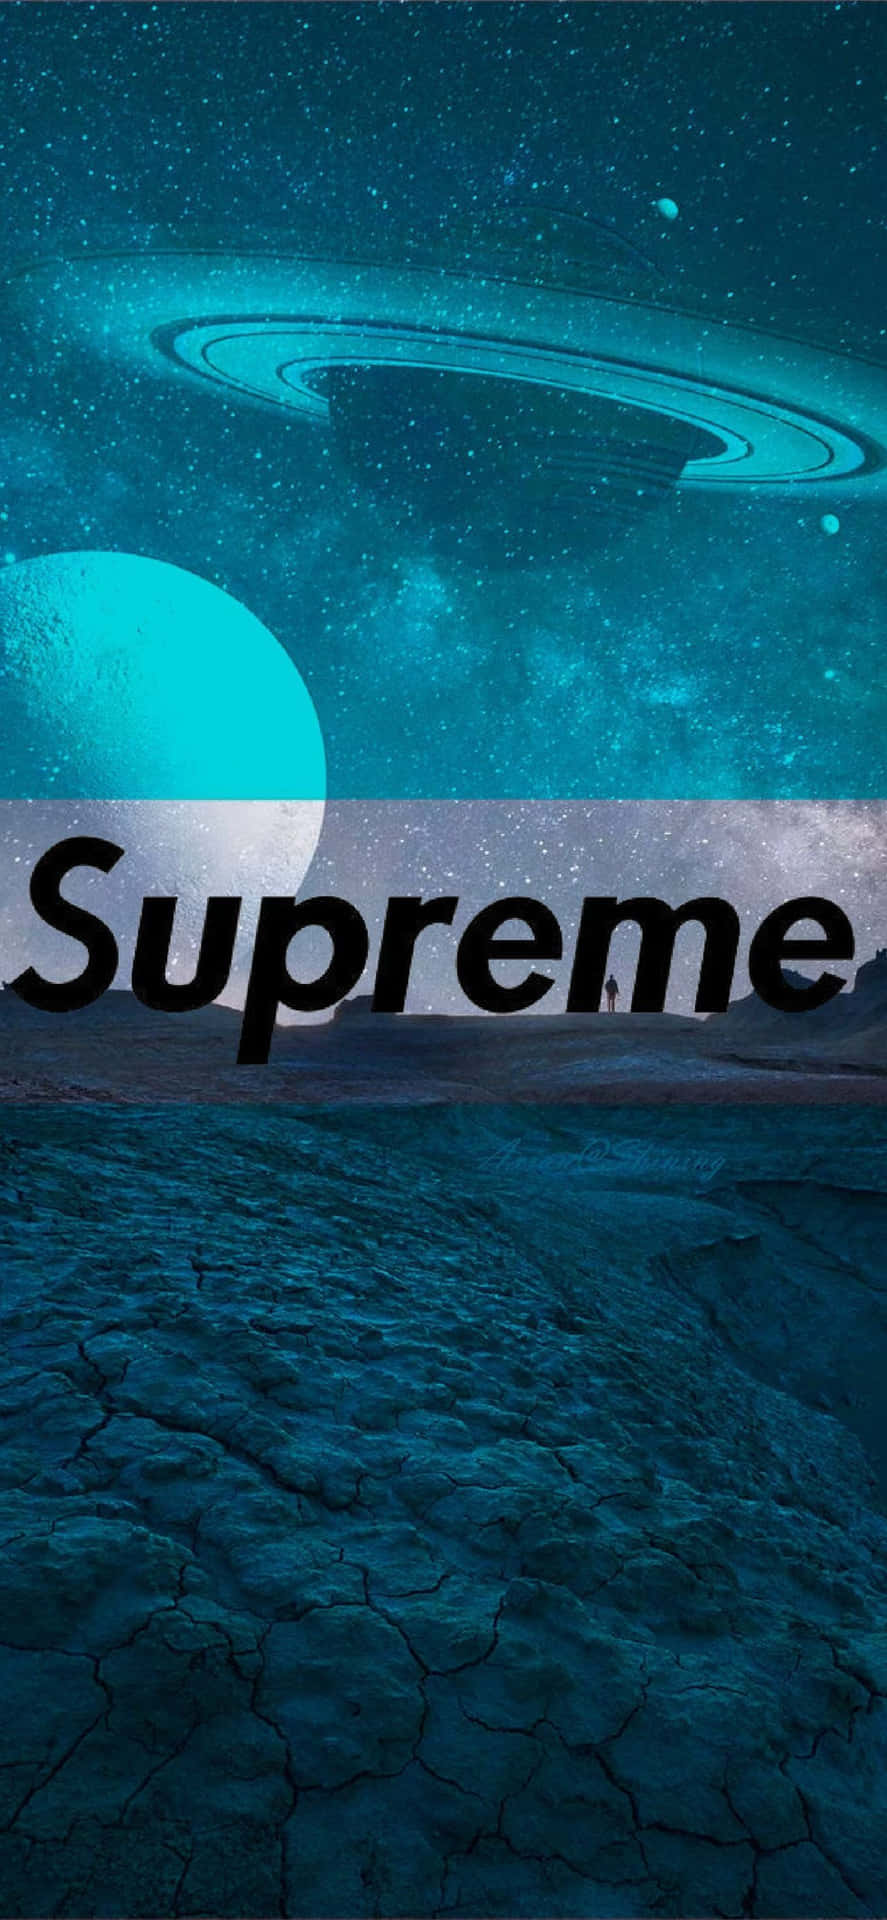 Supreme - A Planet With A Blue Sky